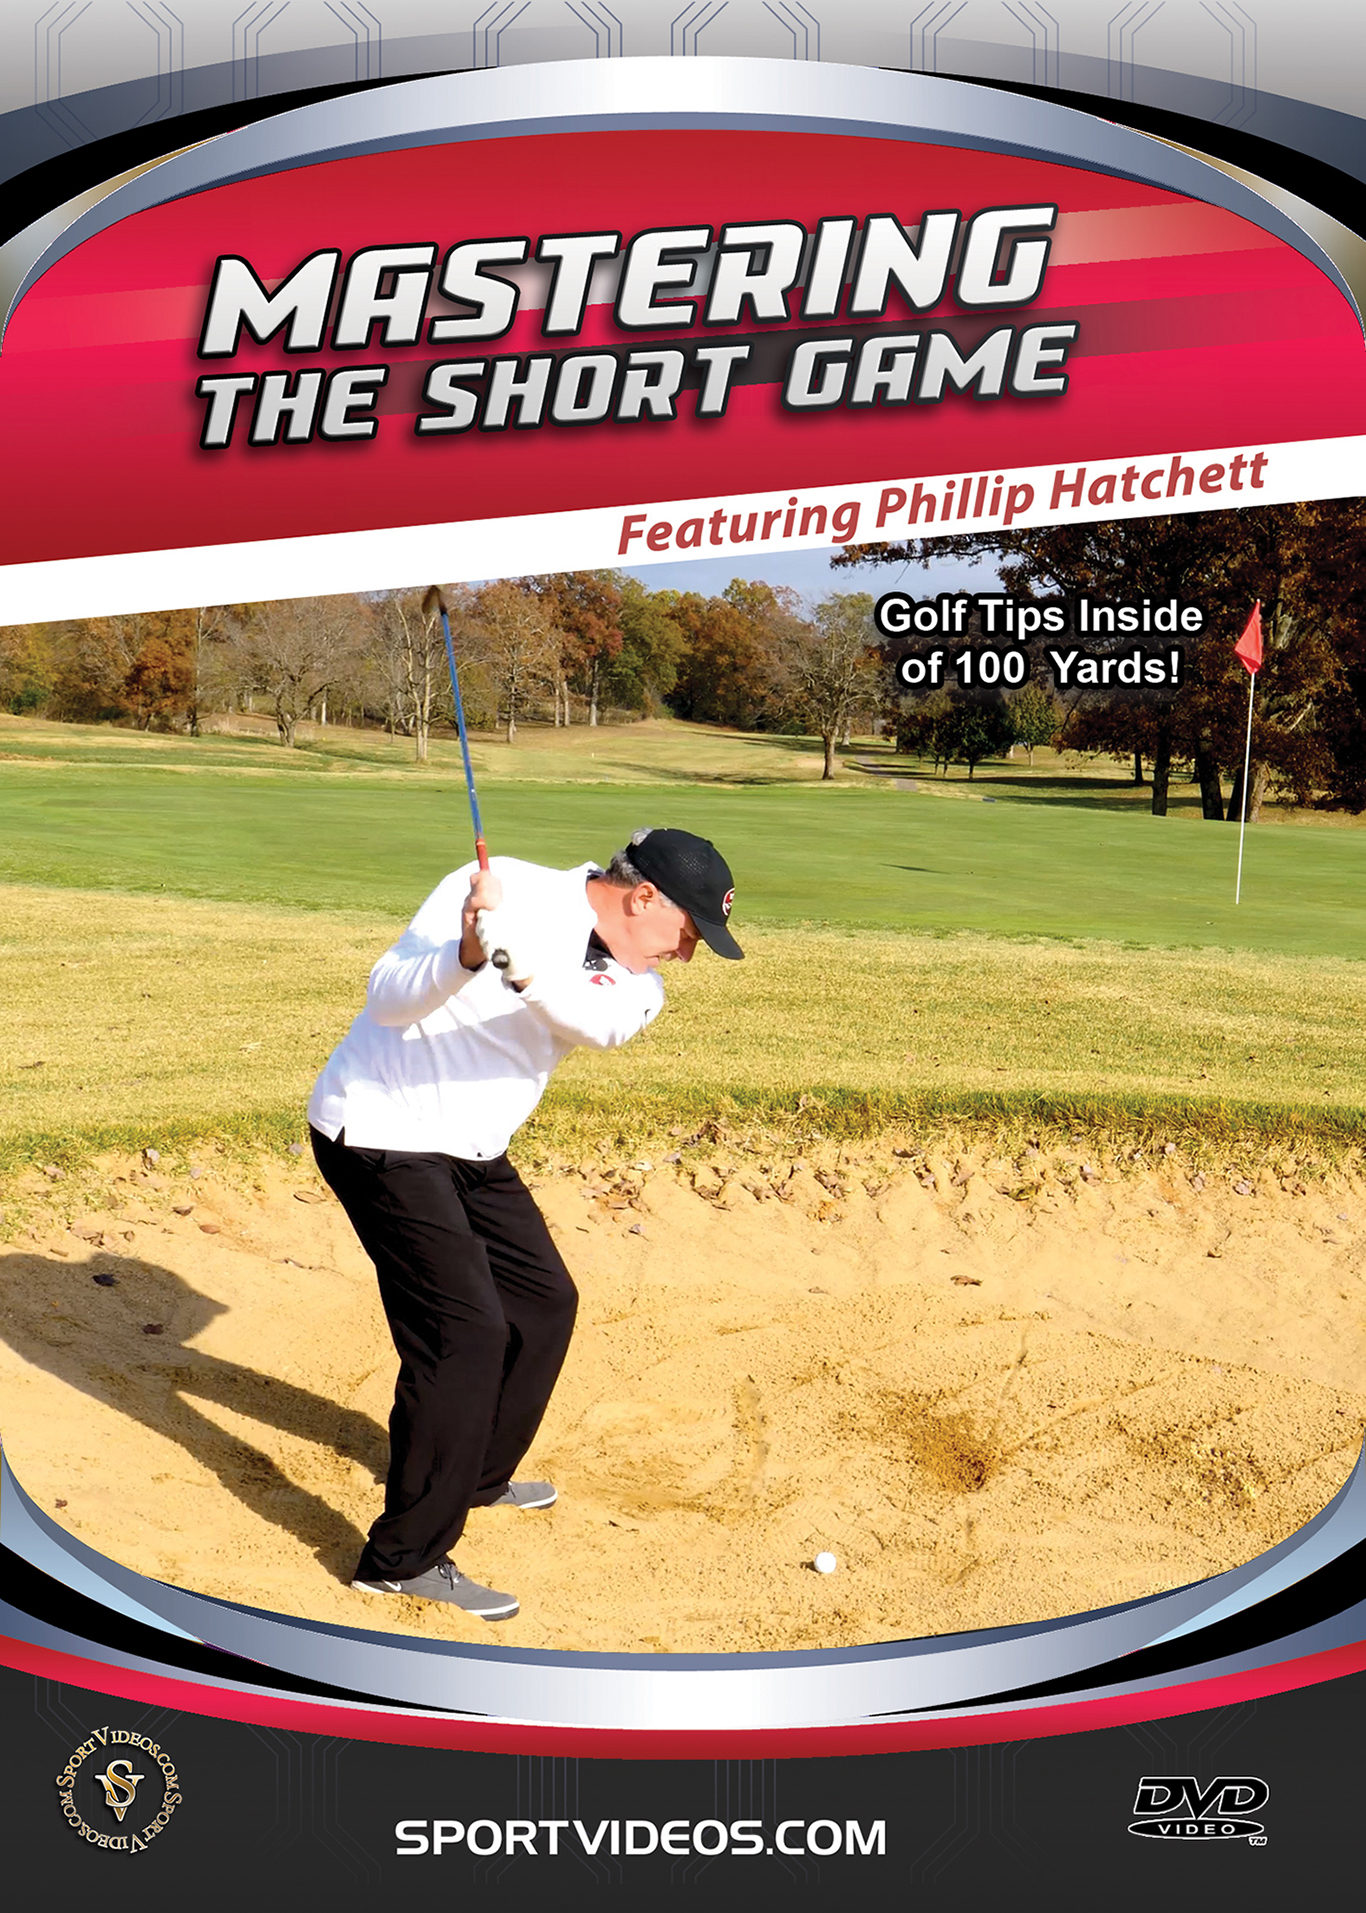 Mastering The Short Game - Golf Tips Inside 100 Yards! DVD or Download - 2018 Title